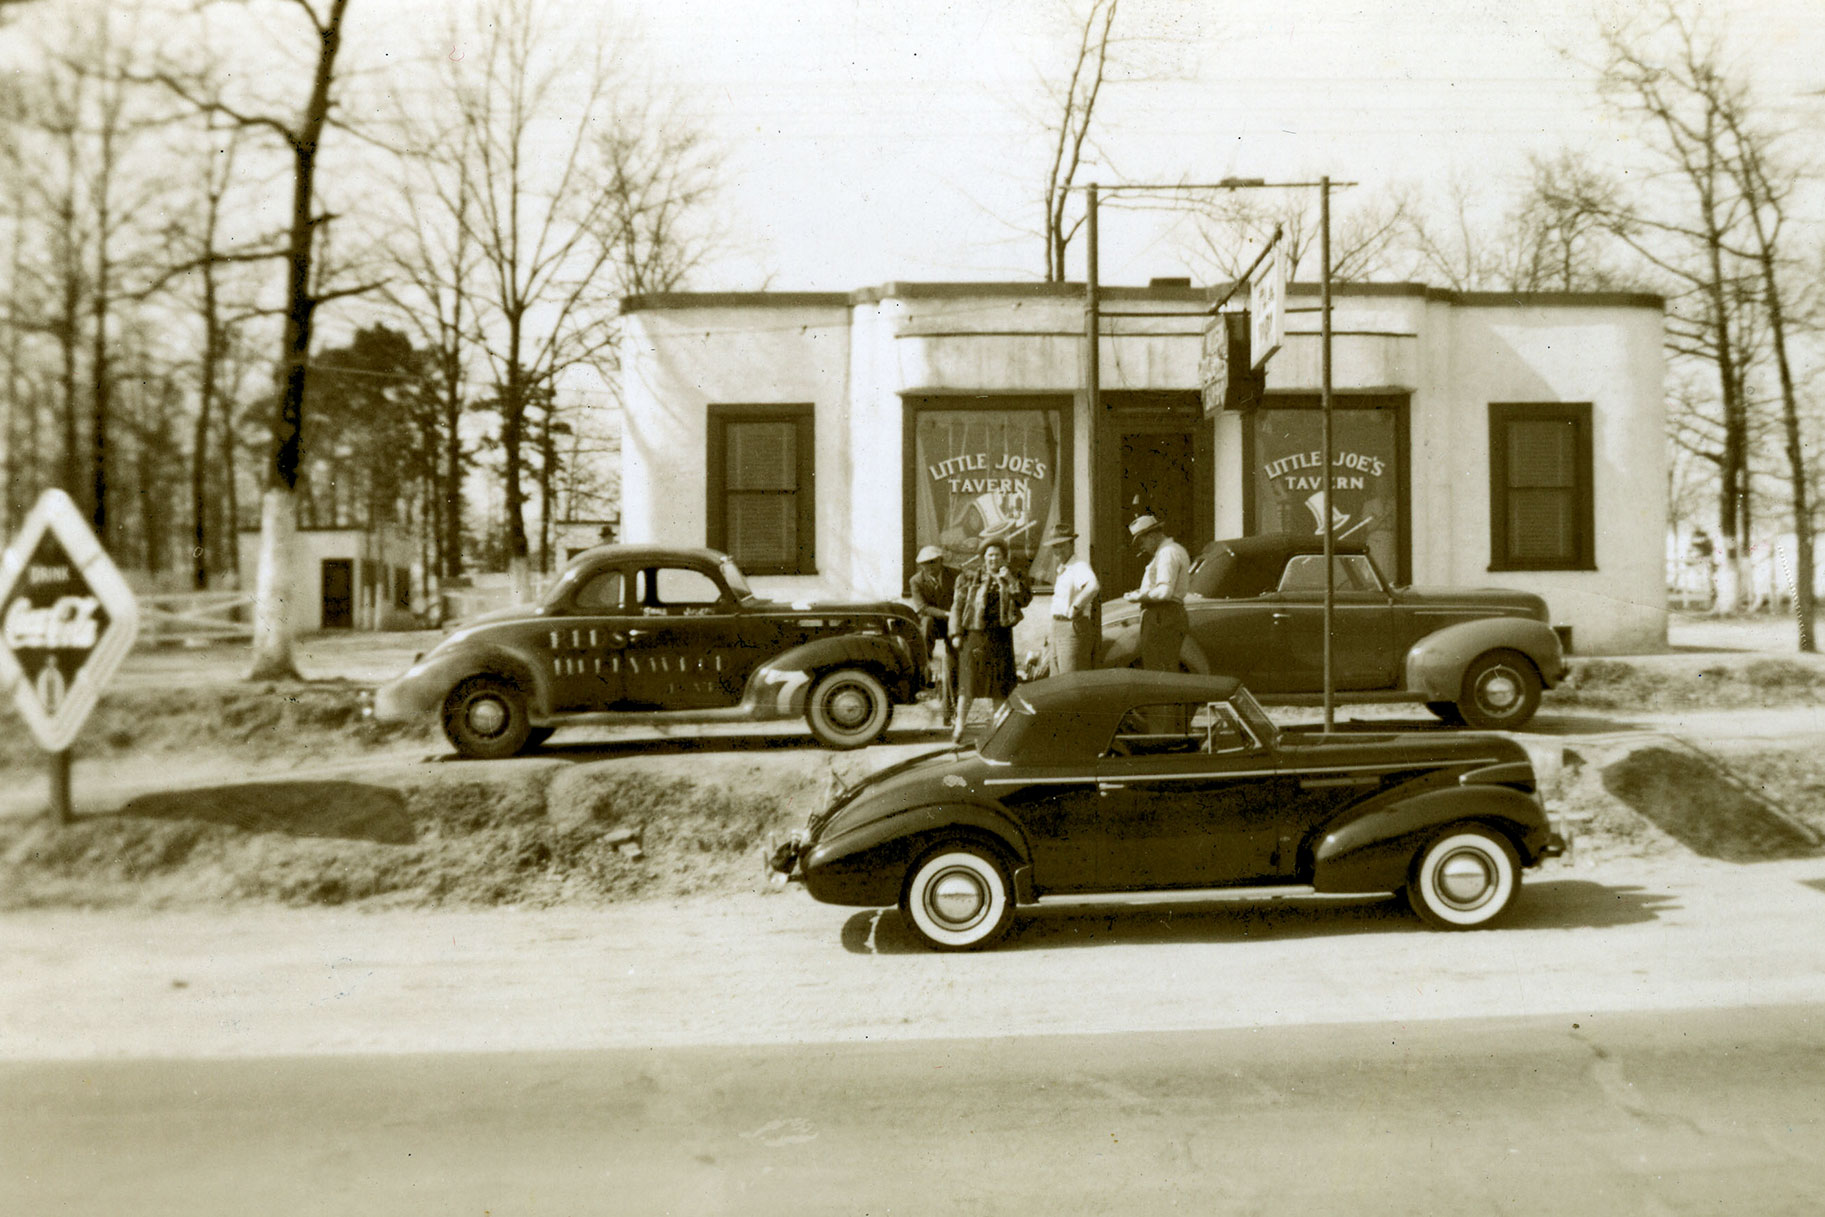 Late-1930s: Many of stock car racing’s early stars learned their driving trade as “bootleggers” hauling illegal liquor. Among them were Smokey Purser, Lloyd Seay, Roy Hall and Joe Littlejohn, whose racecar (No. 7) is seen outside the “Little Joe’s” tavern. Note how Littlejohn’s racer did not look much different than the street cars in the photo.